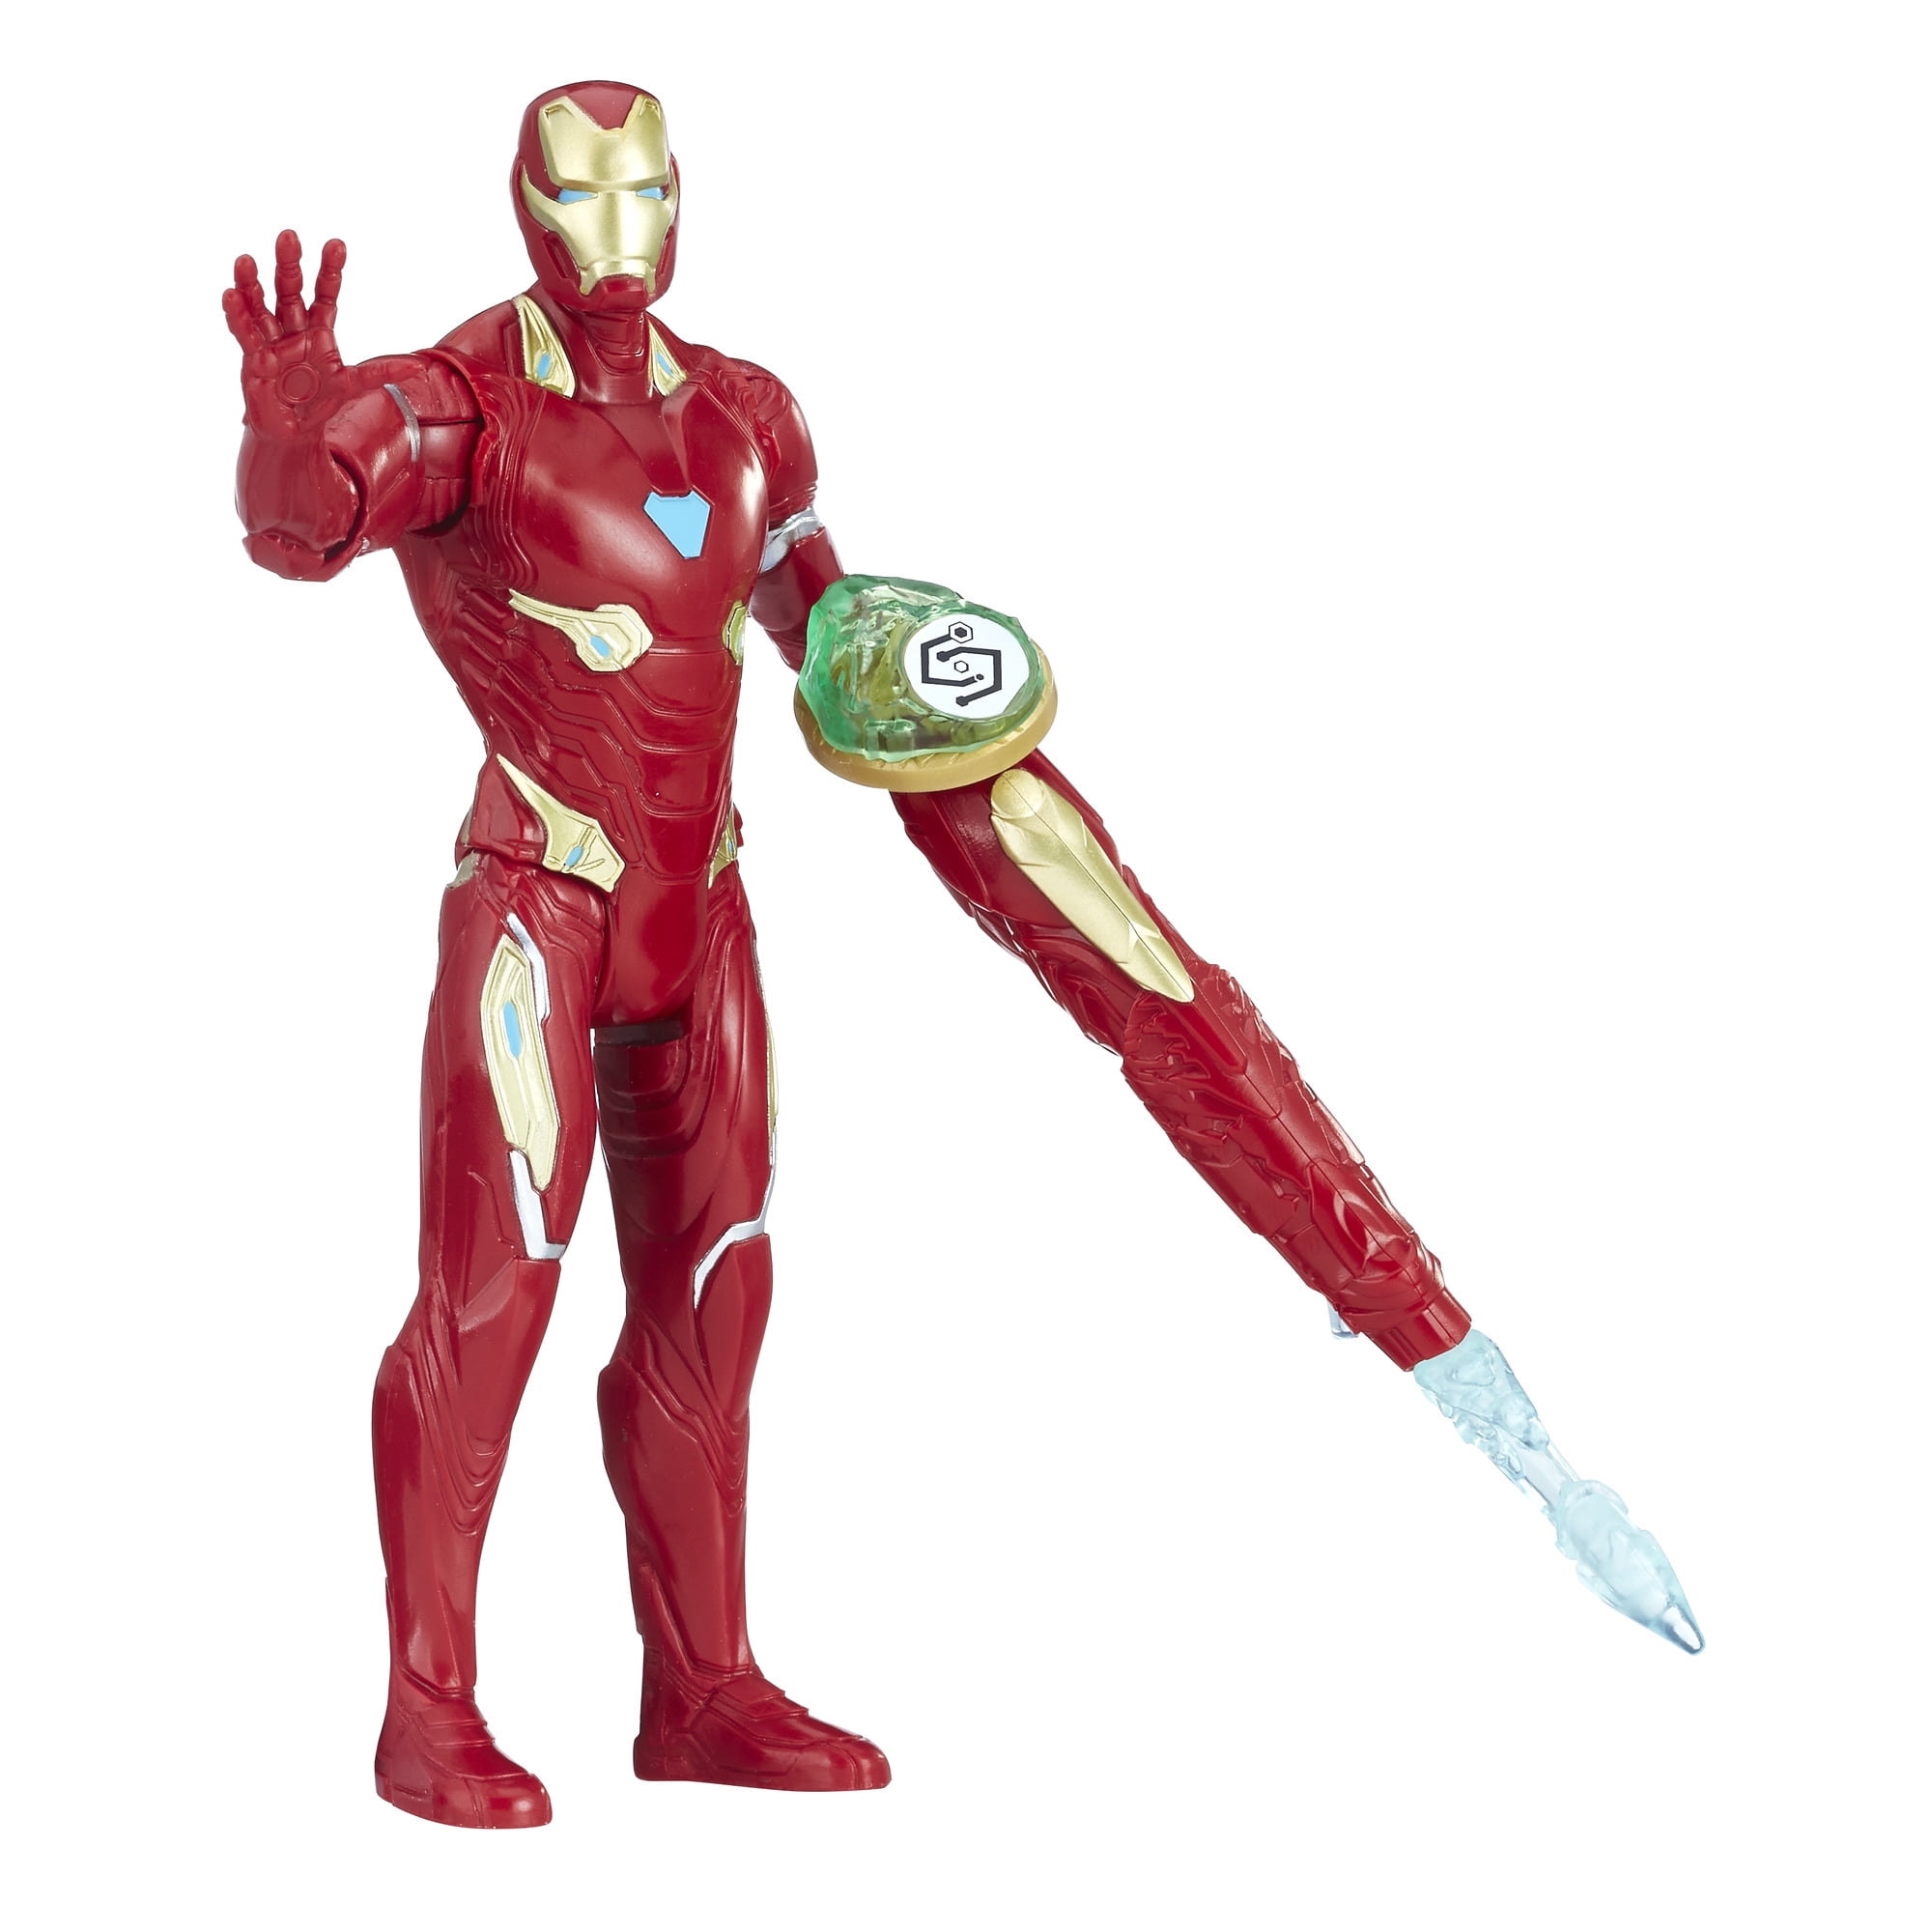 Details about   Hasbro Highly Collectable Marvel Avengers Titan Hero Power FX Series Hulk NEW 